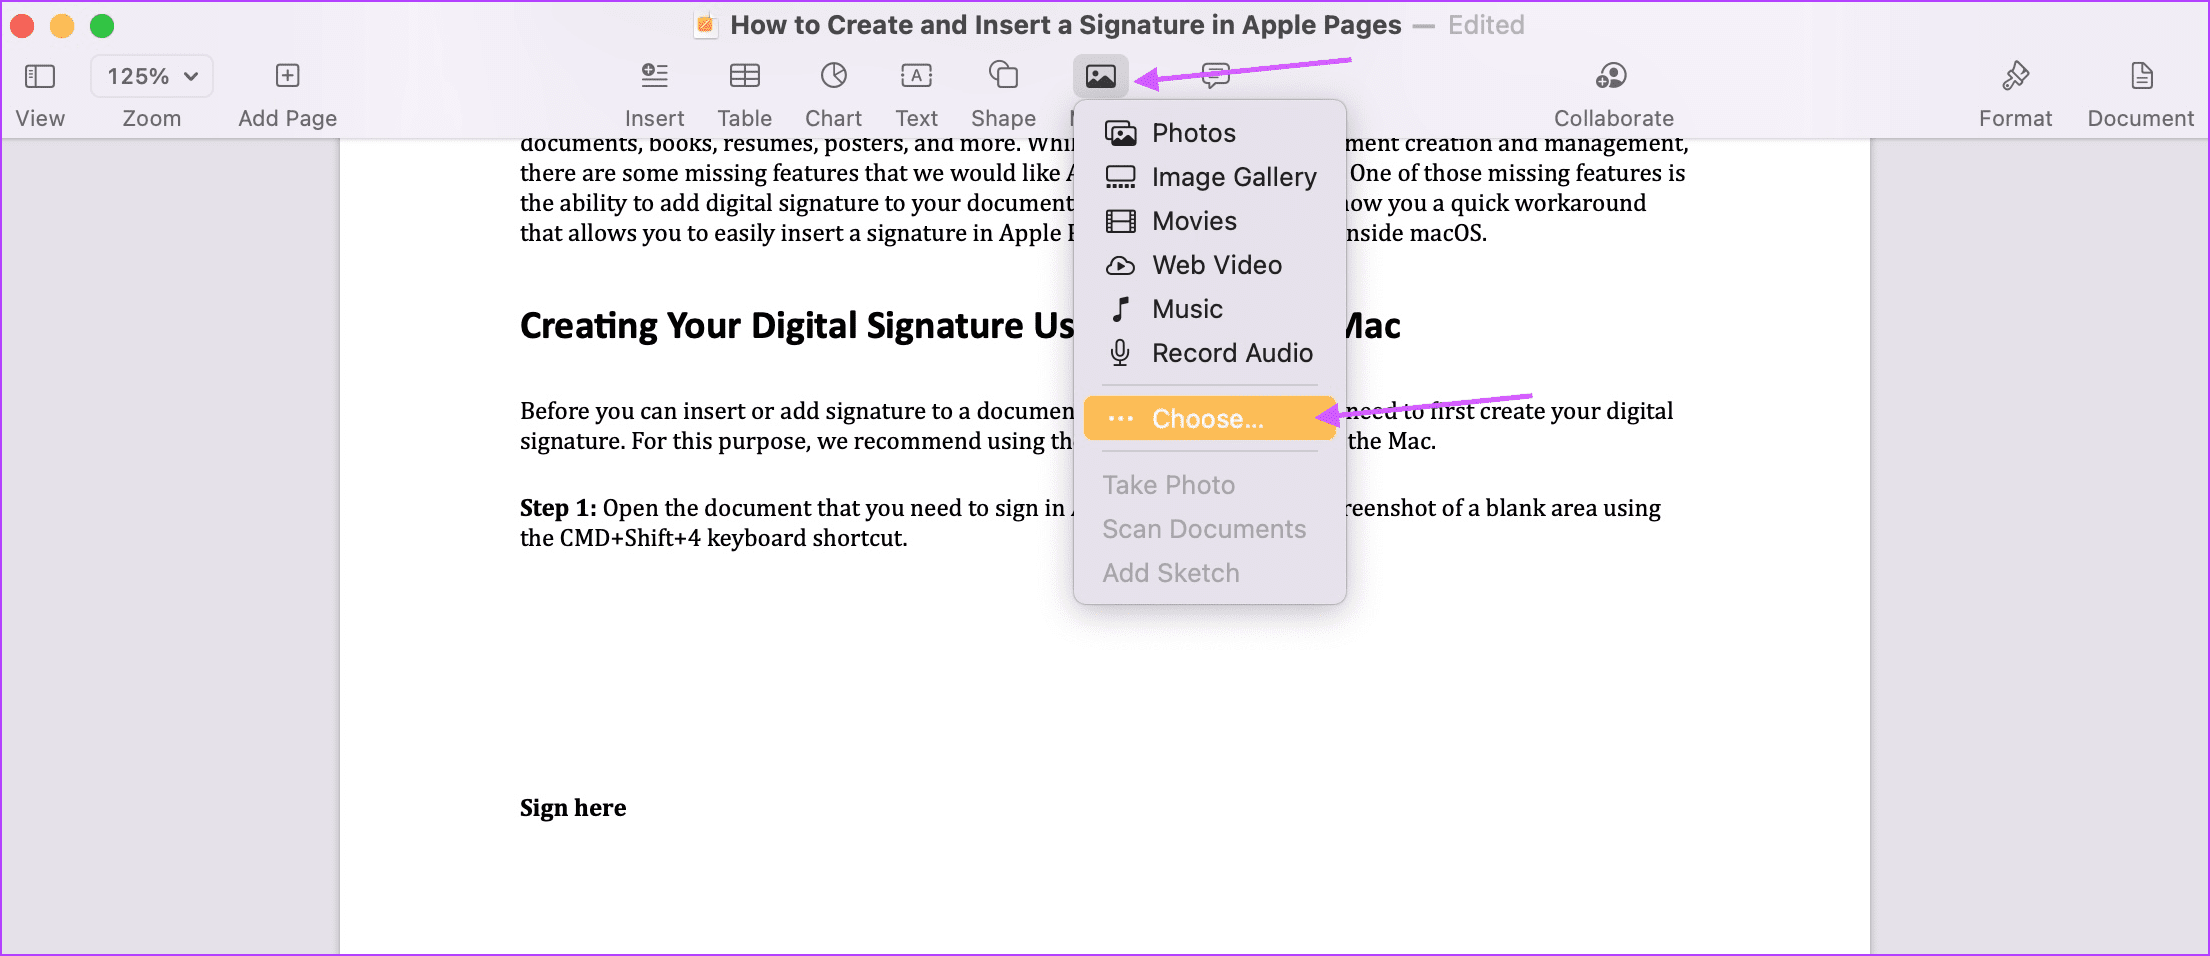 Insert Your Signature in Apple Pages 1